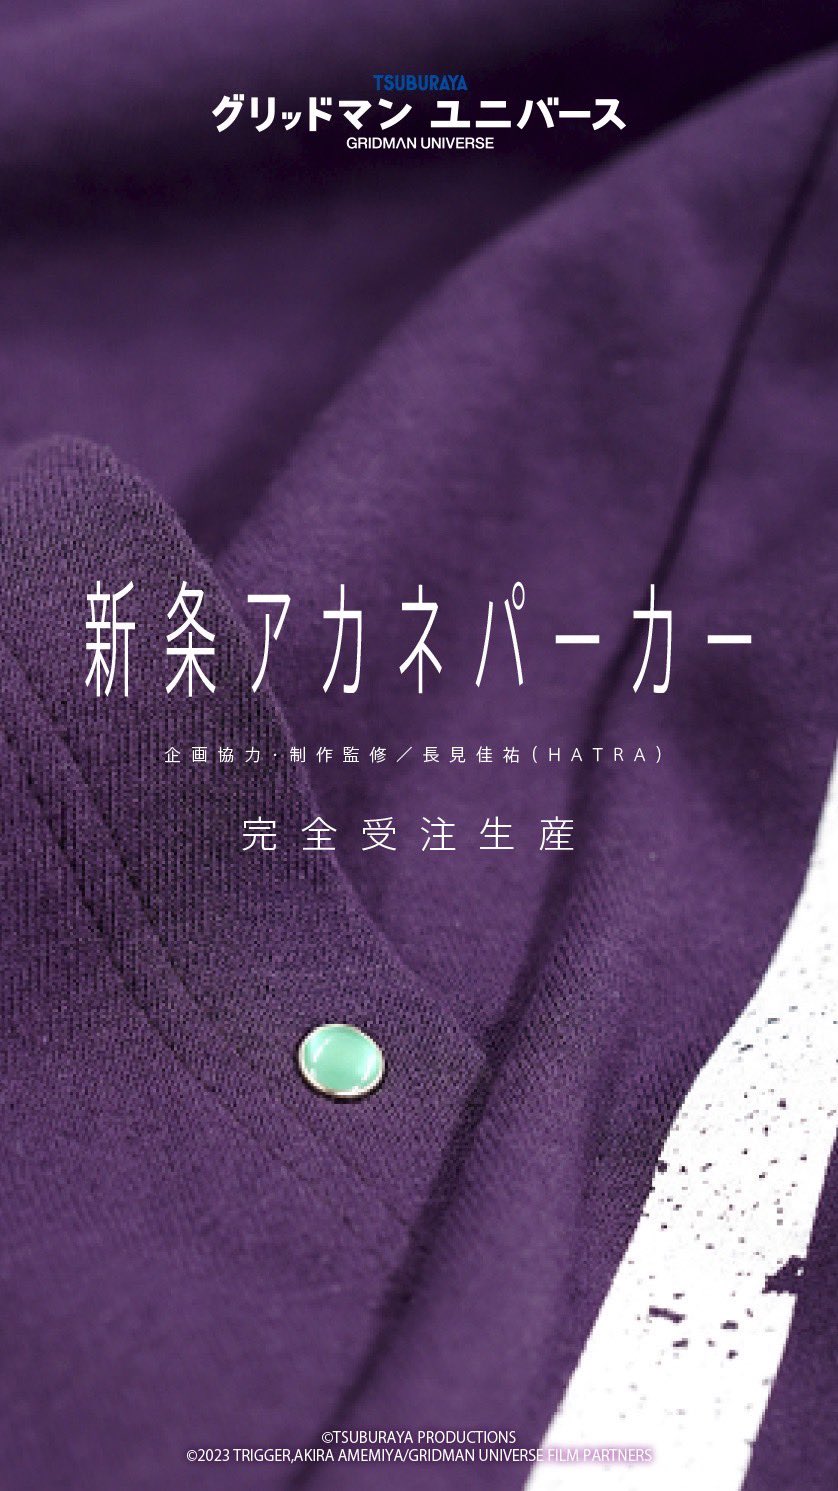 TRIGGER Inc. on X: Announcement “Akane Hoodie” will be made to